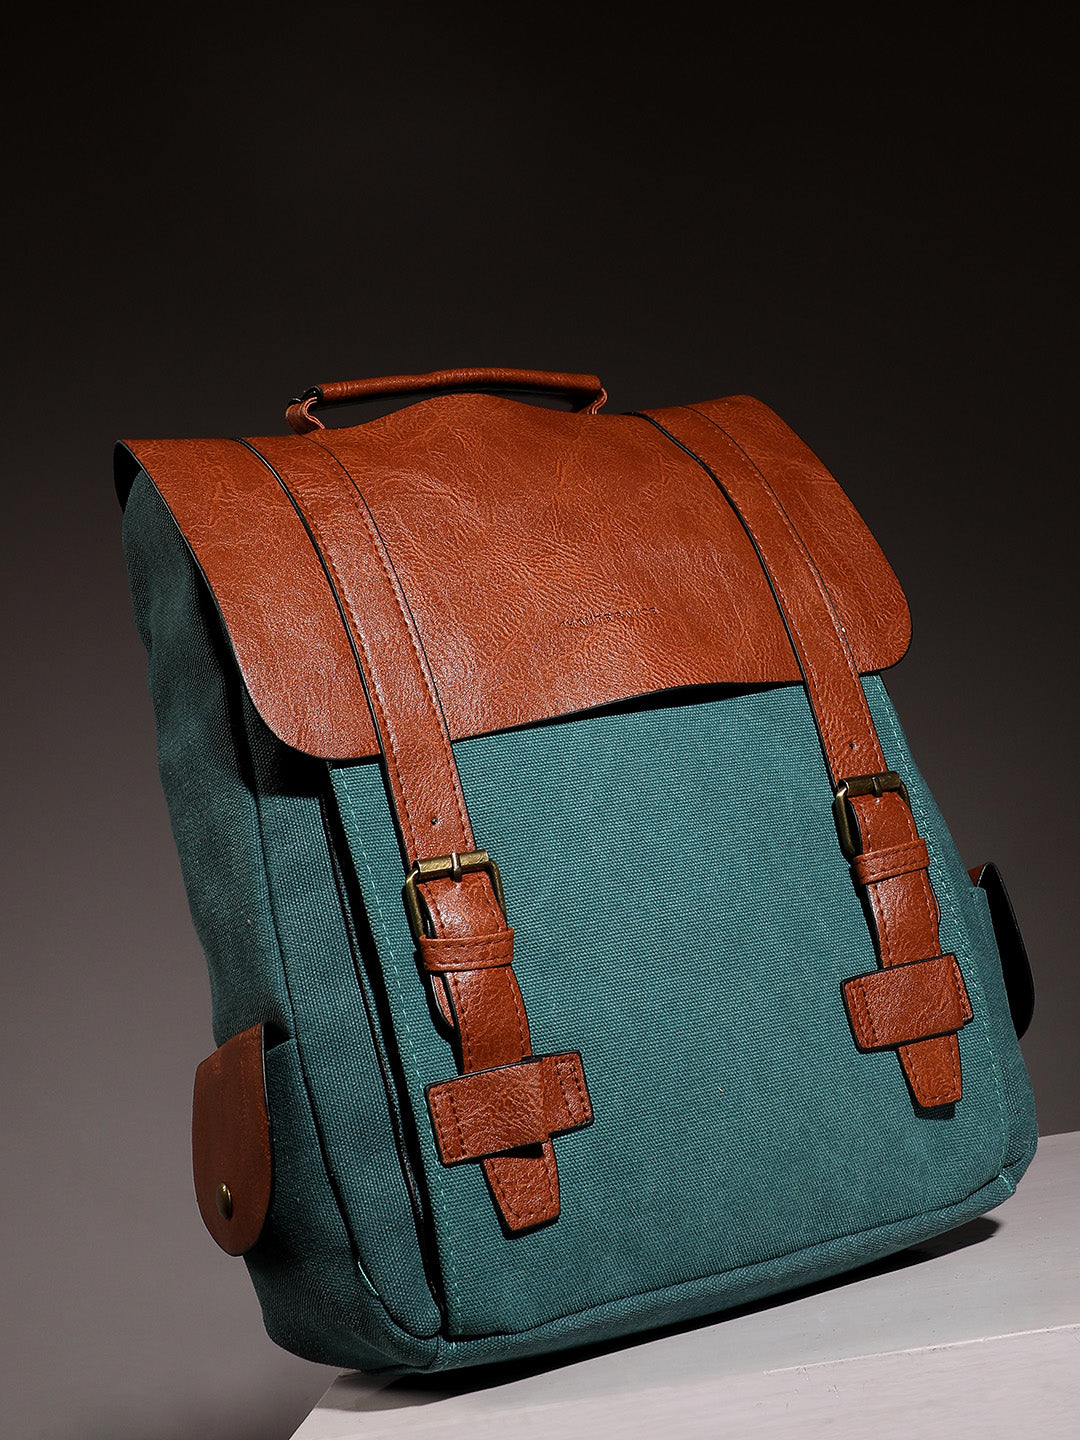 The Journey Backpack - Teal Green & Brown